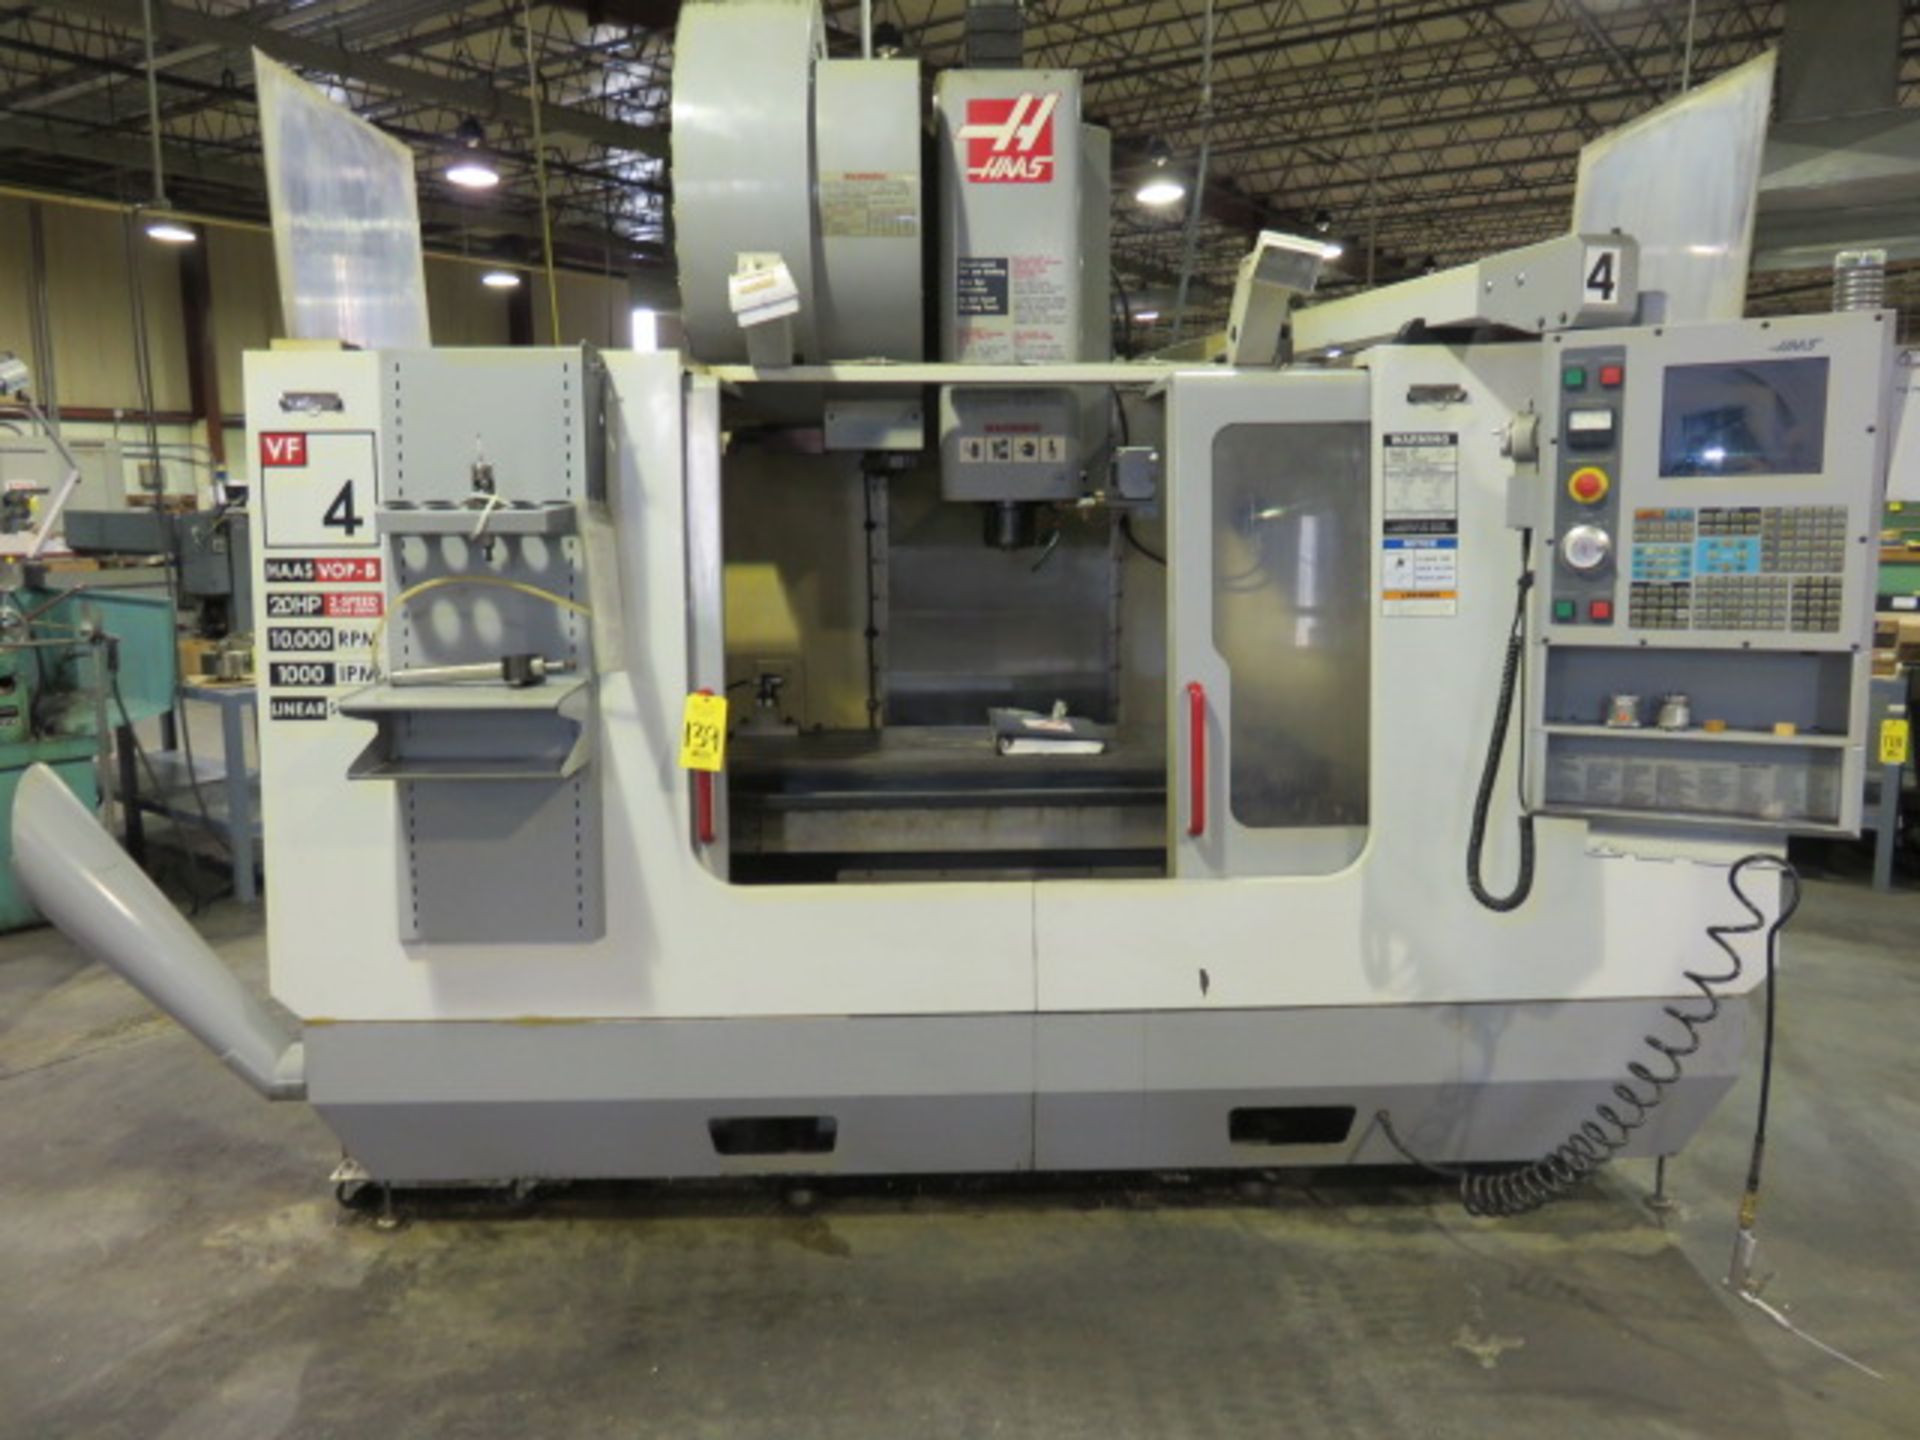 2003 HAAS VF-4B CNC VERTICAL MACHINING CENTER, S/N 33031, 11,462 HOURS, LINEAR SCALES